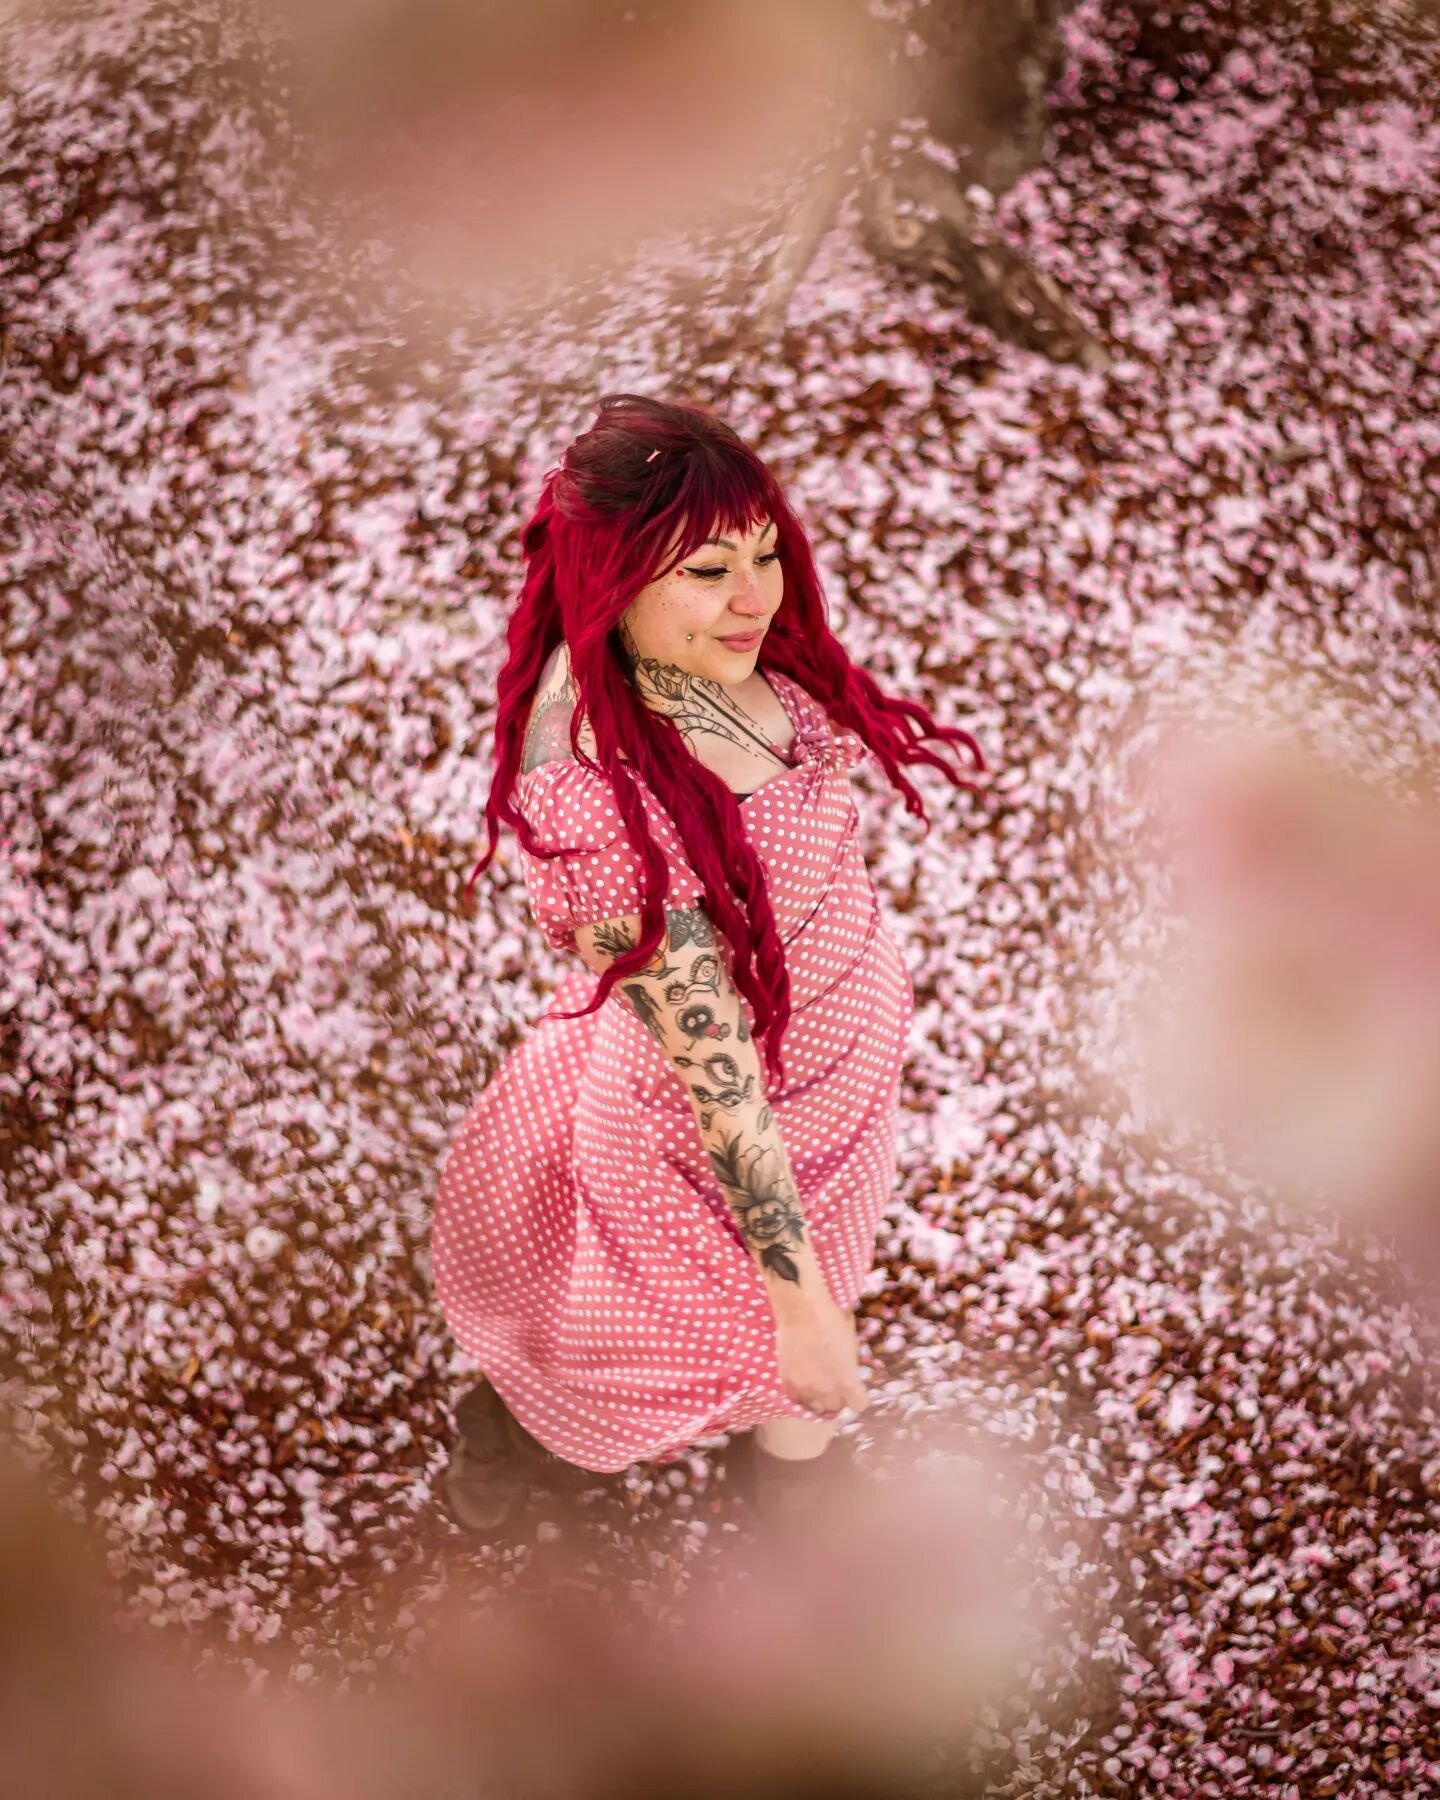 ***Pretty in Pink*** 

Any other photographer really love how a 50mm 1.8 lens looks. 

The swirls in the petals on the ground and the softness of the petals in the trees. 

So glad I climbed up and shot down from inside the tree.

@yokaiaa putting on